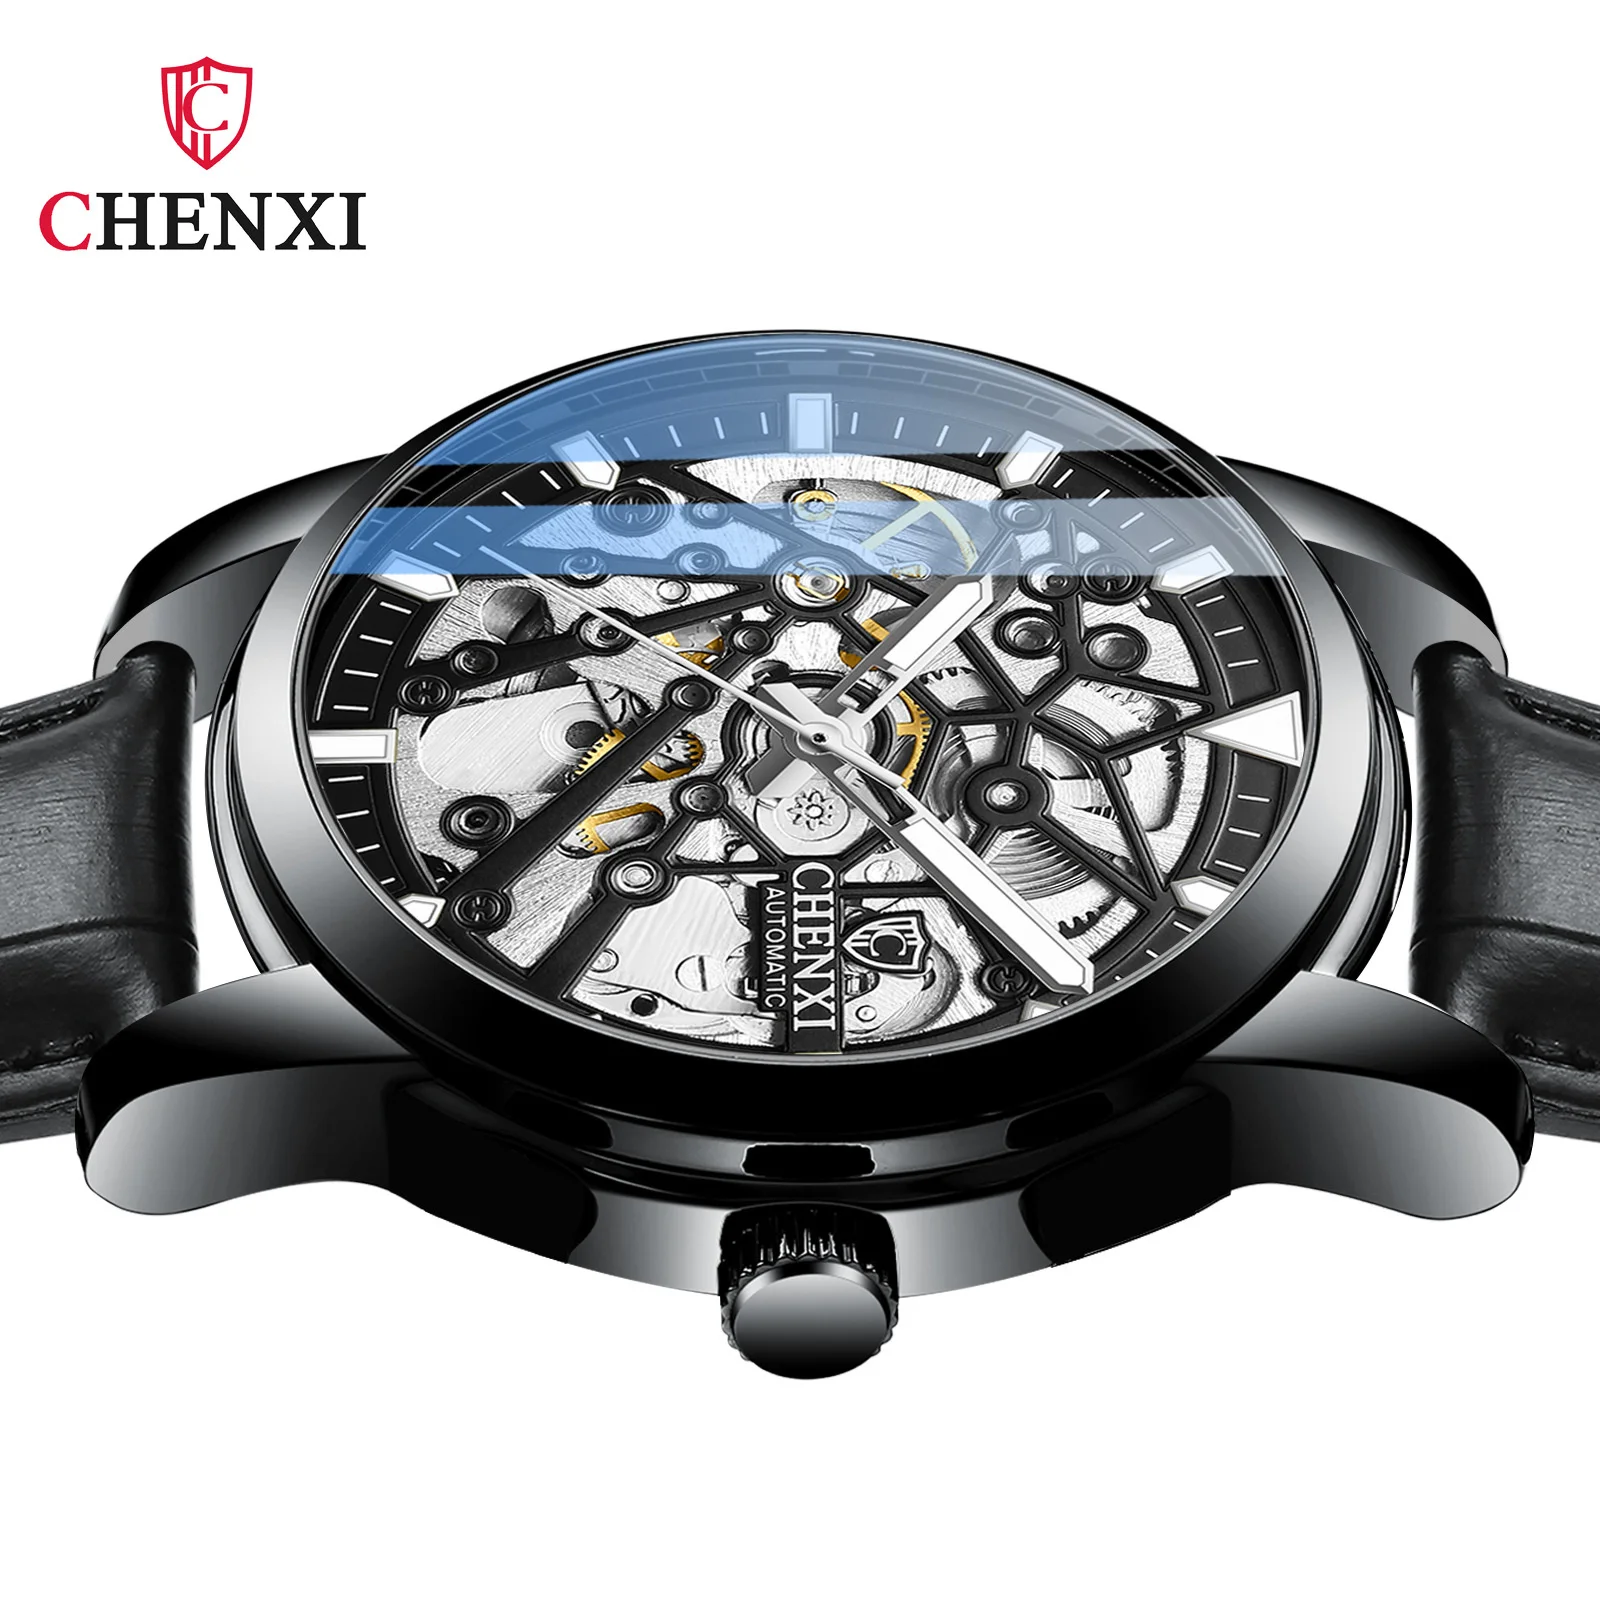 

CHENXI 8812 2021 New Hollow Out Automatic Men's Waterproof Leather Strap Luminous Mechanical Watch Genuine Free shipping